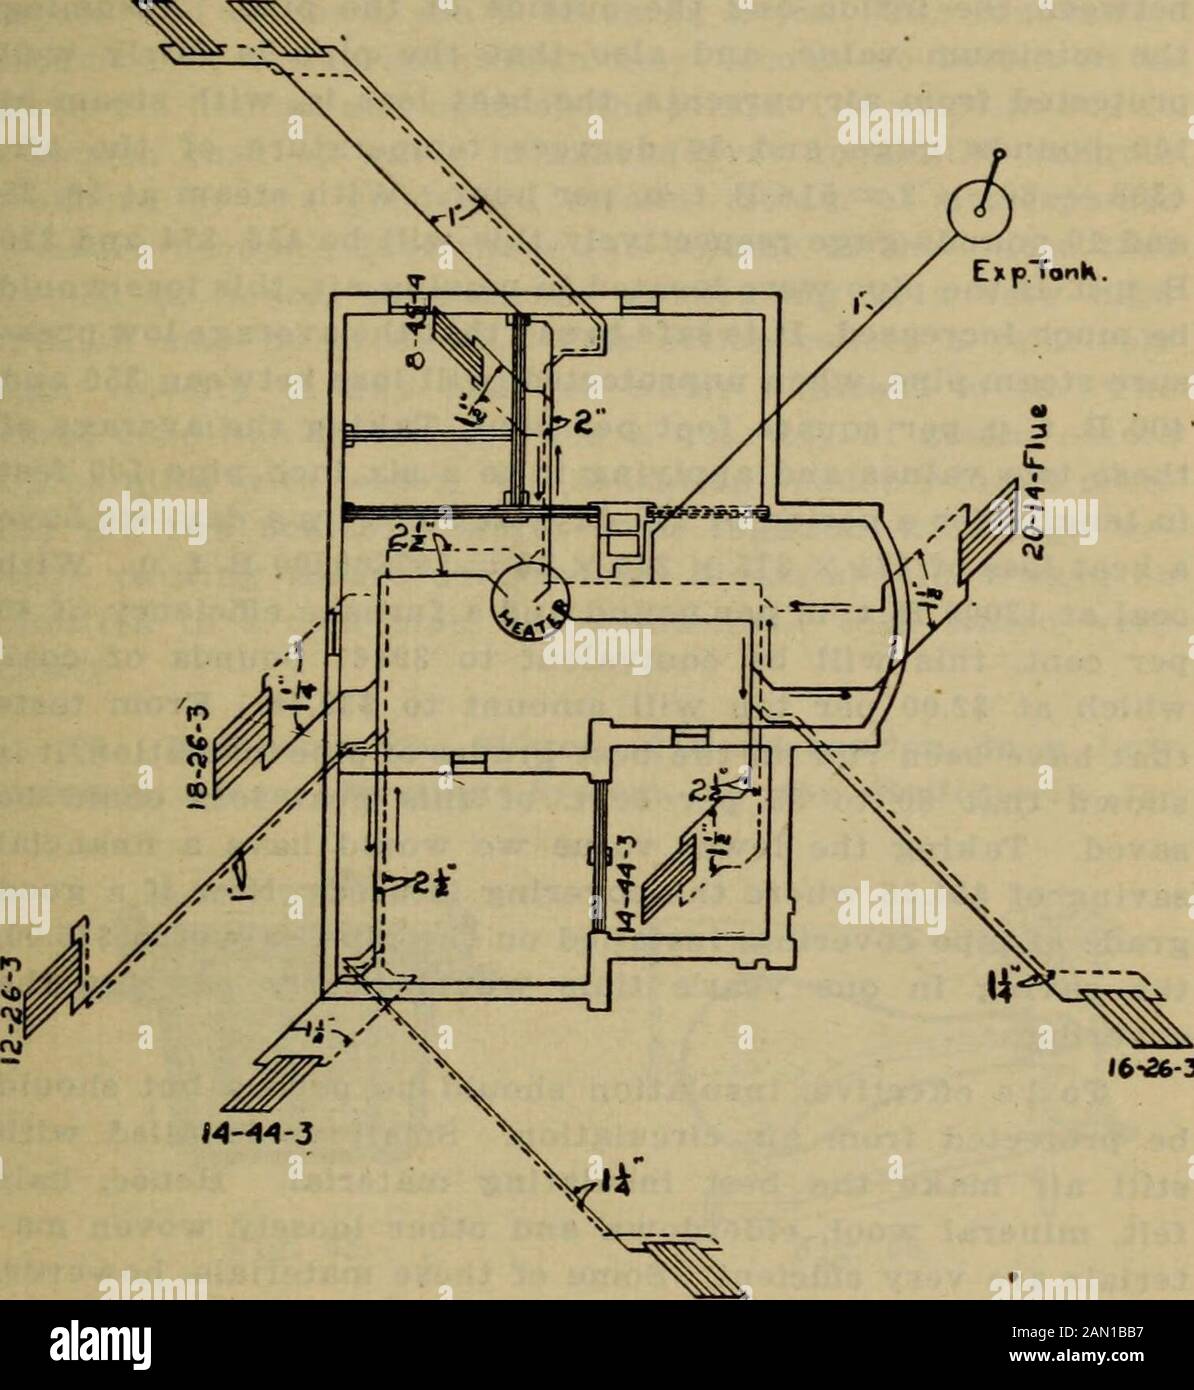 Handbook for heating and ventilating engineers . SECOND FLOOR PLAN.Ceiling 9. Fig. 67. HOT WATER AND STEAM HEATING 131 1226^ 7-26-3 ExpTonK.. I6-26-3 l4-^A-3 16-26-3MAIN AND RISER LAYOUT. Fig. 67a. 88. Insulatlns Steam Pipes:—In all heating systems,pipes carrying steam or water should be insulated to protectfrom heat losses, unless these pipes are to serve as radiatingsurfaces. In a large number of plants the heat lost throughthese unprotected surfaces, if saved, would soon pay for firstclass insulation. The heat transmitted to still air through 132 HEATING AND VENTILATION one square foot of t Stock Photo